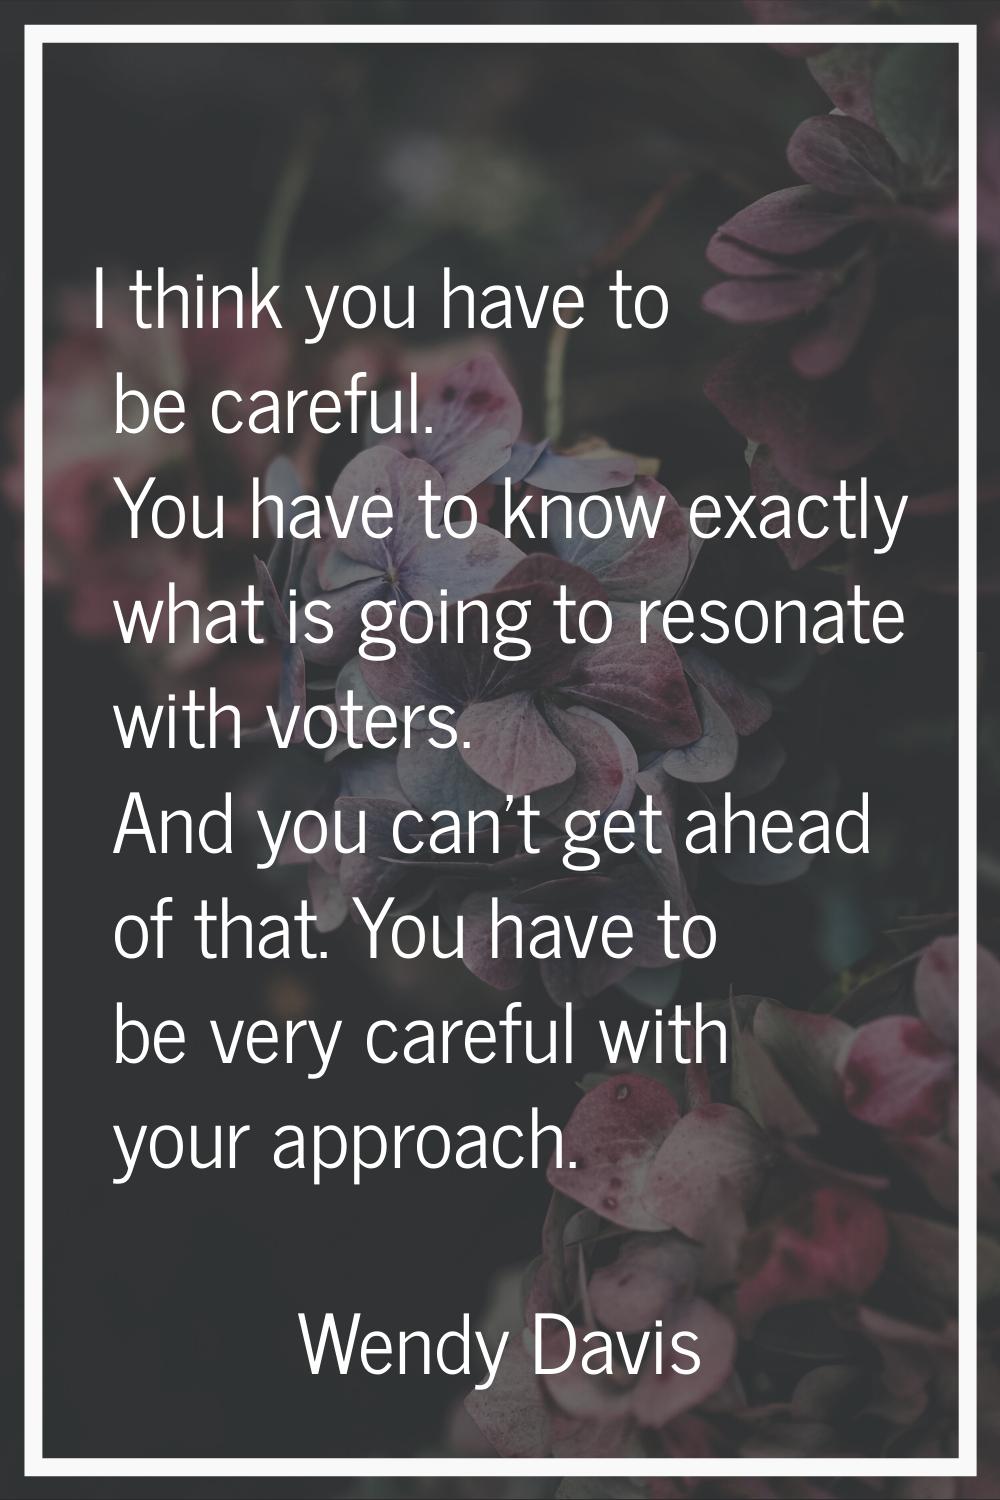 I think you have to be careful. You have to know exactly what is going to resonate with voters. And